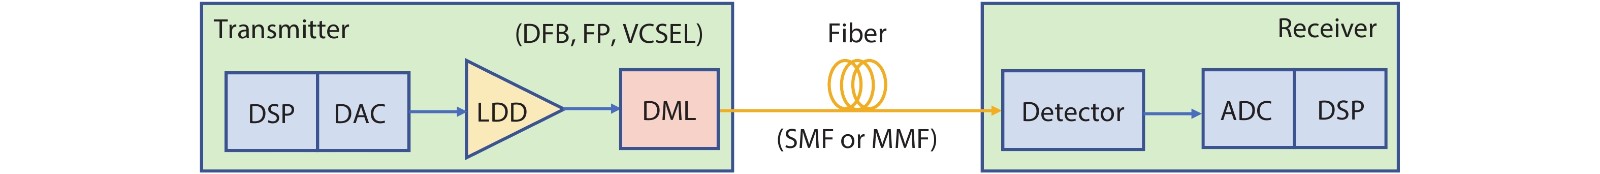 (Color online) A schematic diagram of the IM/DD system based on DML. DSP: digital signal processing; DAC: digital-to-analog convertor; LDD: laser diode driver; DML: directly modulated laser; SMF: single mode fiber; MMF: multi-mode fiber; ADC: analog-to-digital convertor.